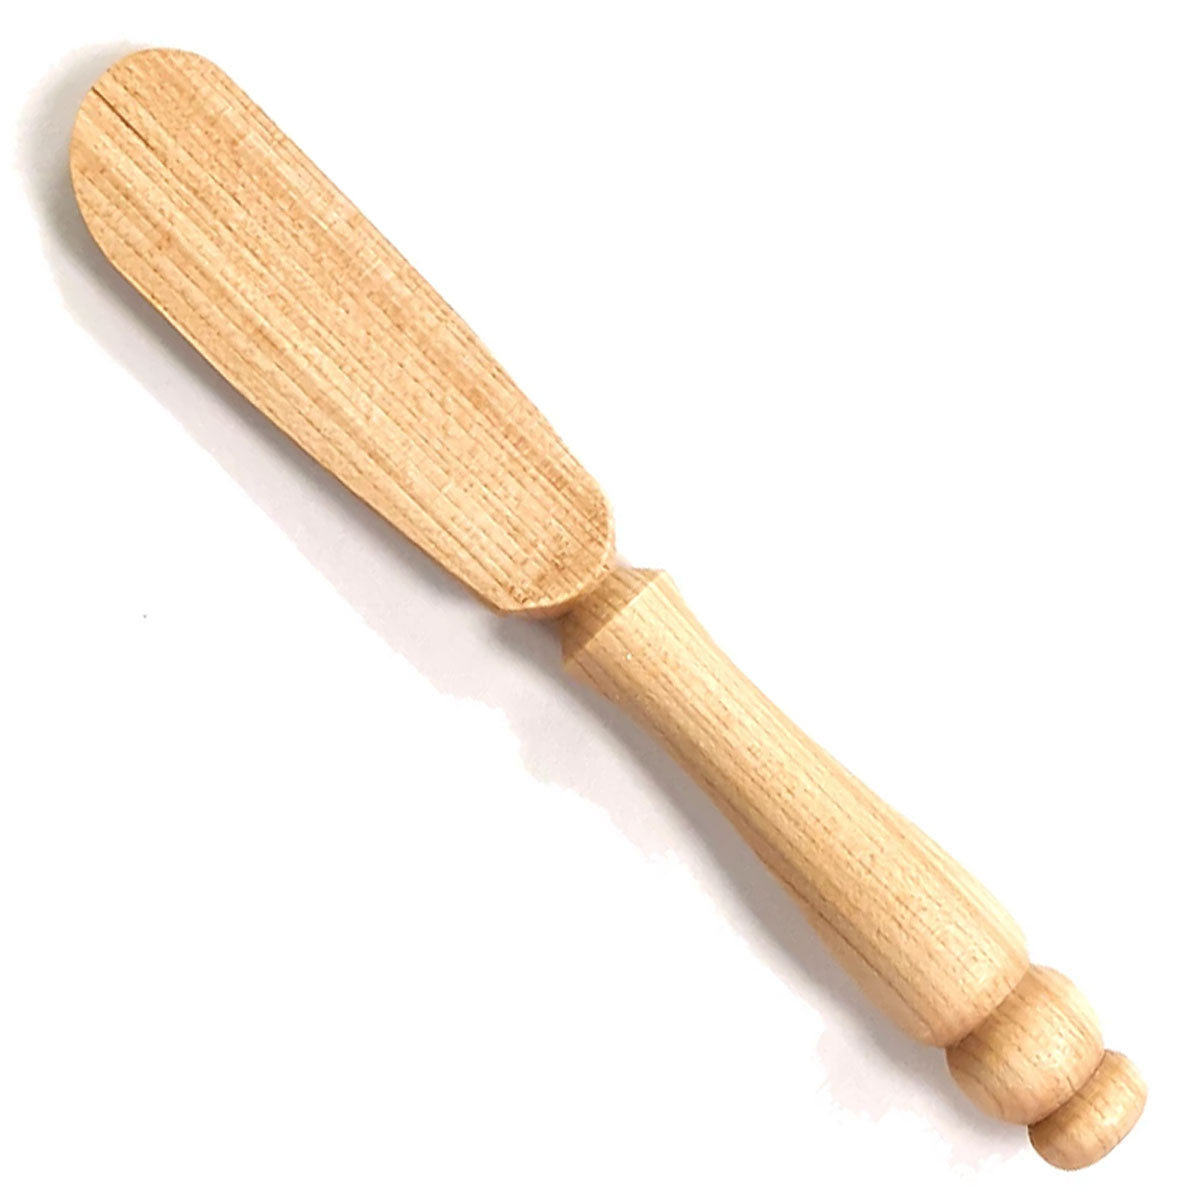 Cane Tree Wood Butter Spreader, 6 1/4 inch